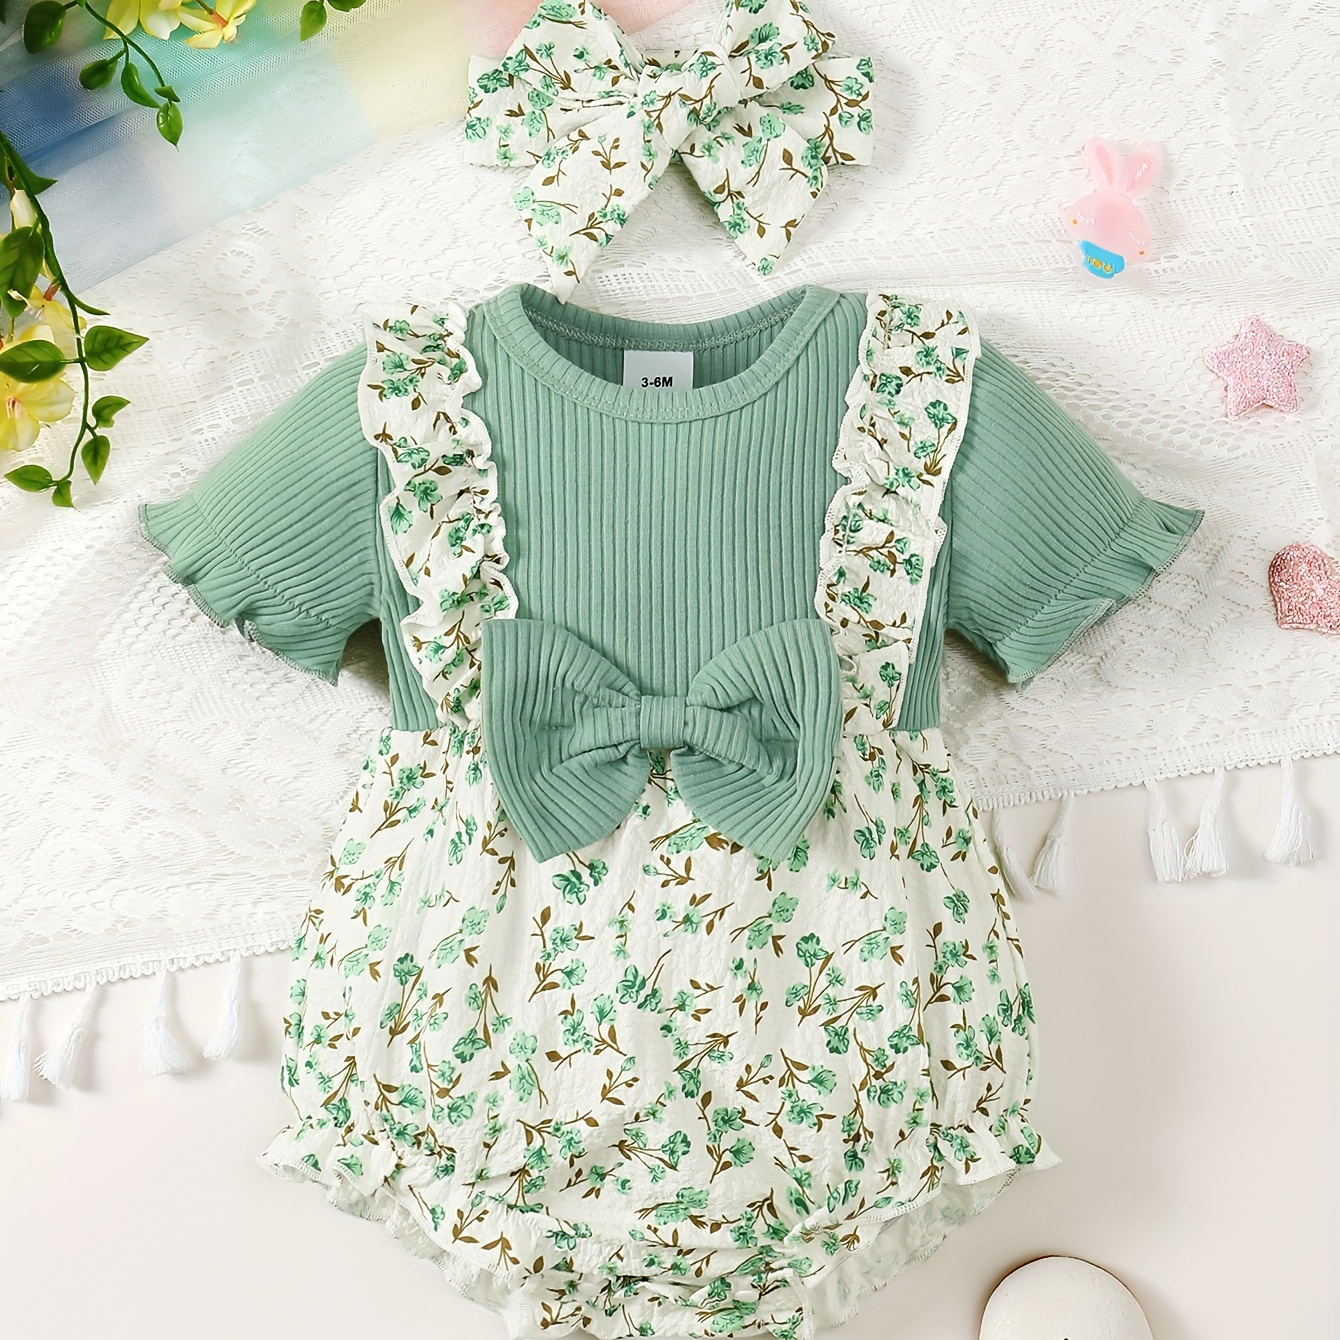 

Baby's Bowknot Decor Faux Two-piece Triangle Bodysuit, Casual Floral Pattern Short Sleeve Romper, Toddler & Infant Girl's Onesie For Summer, As Gift